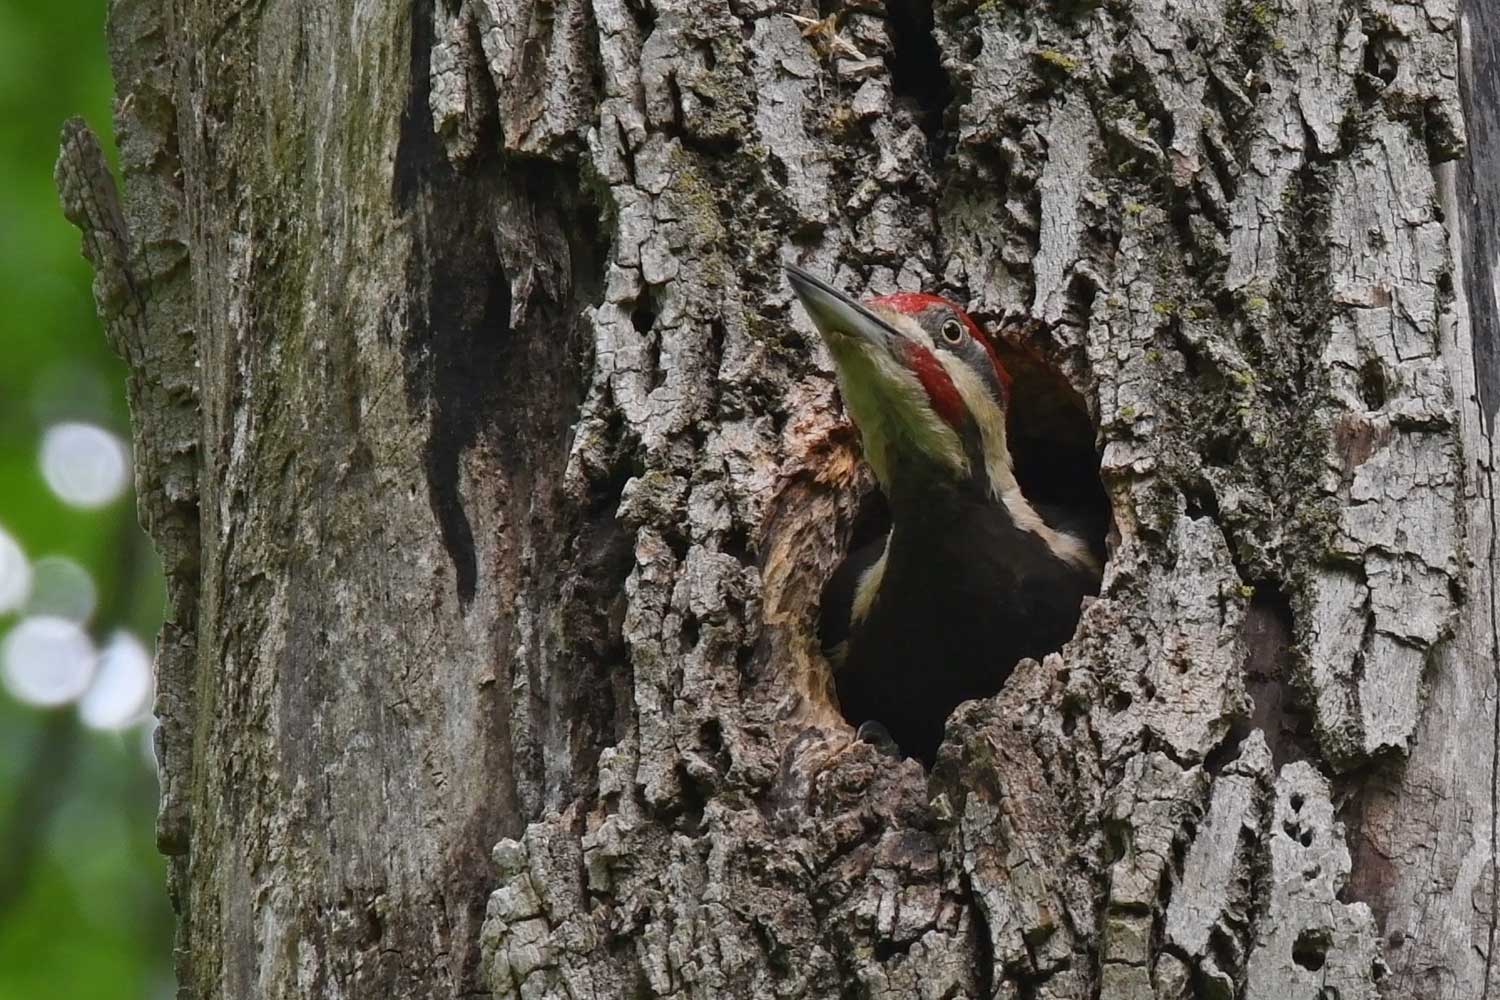 A pileated woodpecker sticking its head out of a tree cavity.